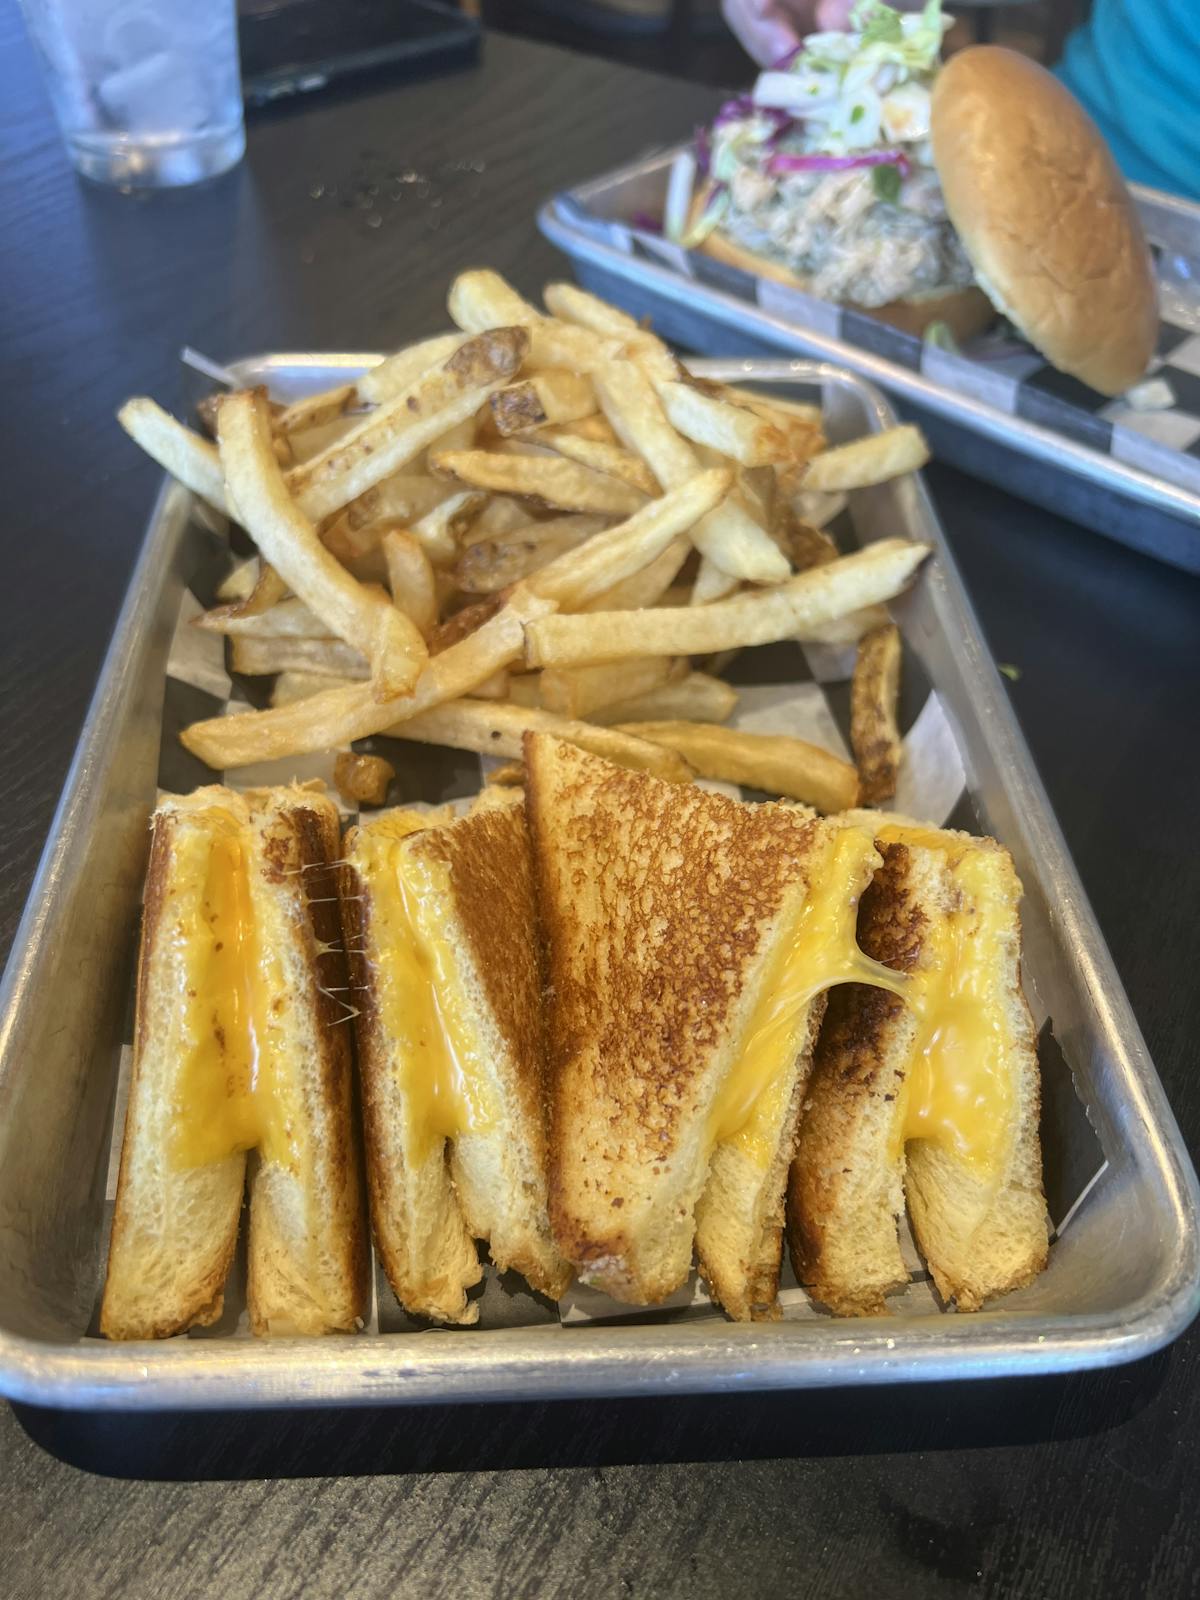 a tray of food with a sandwich and fries on a table